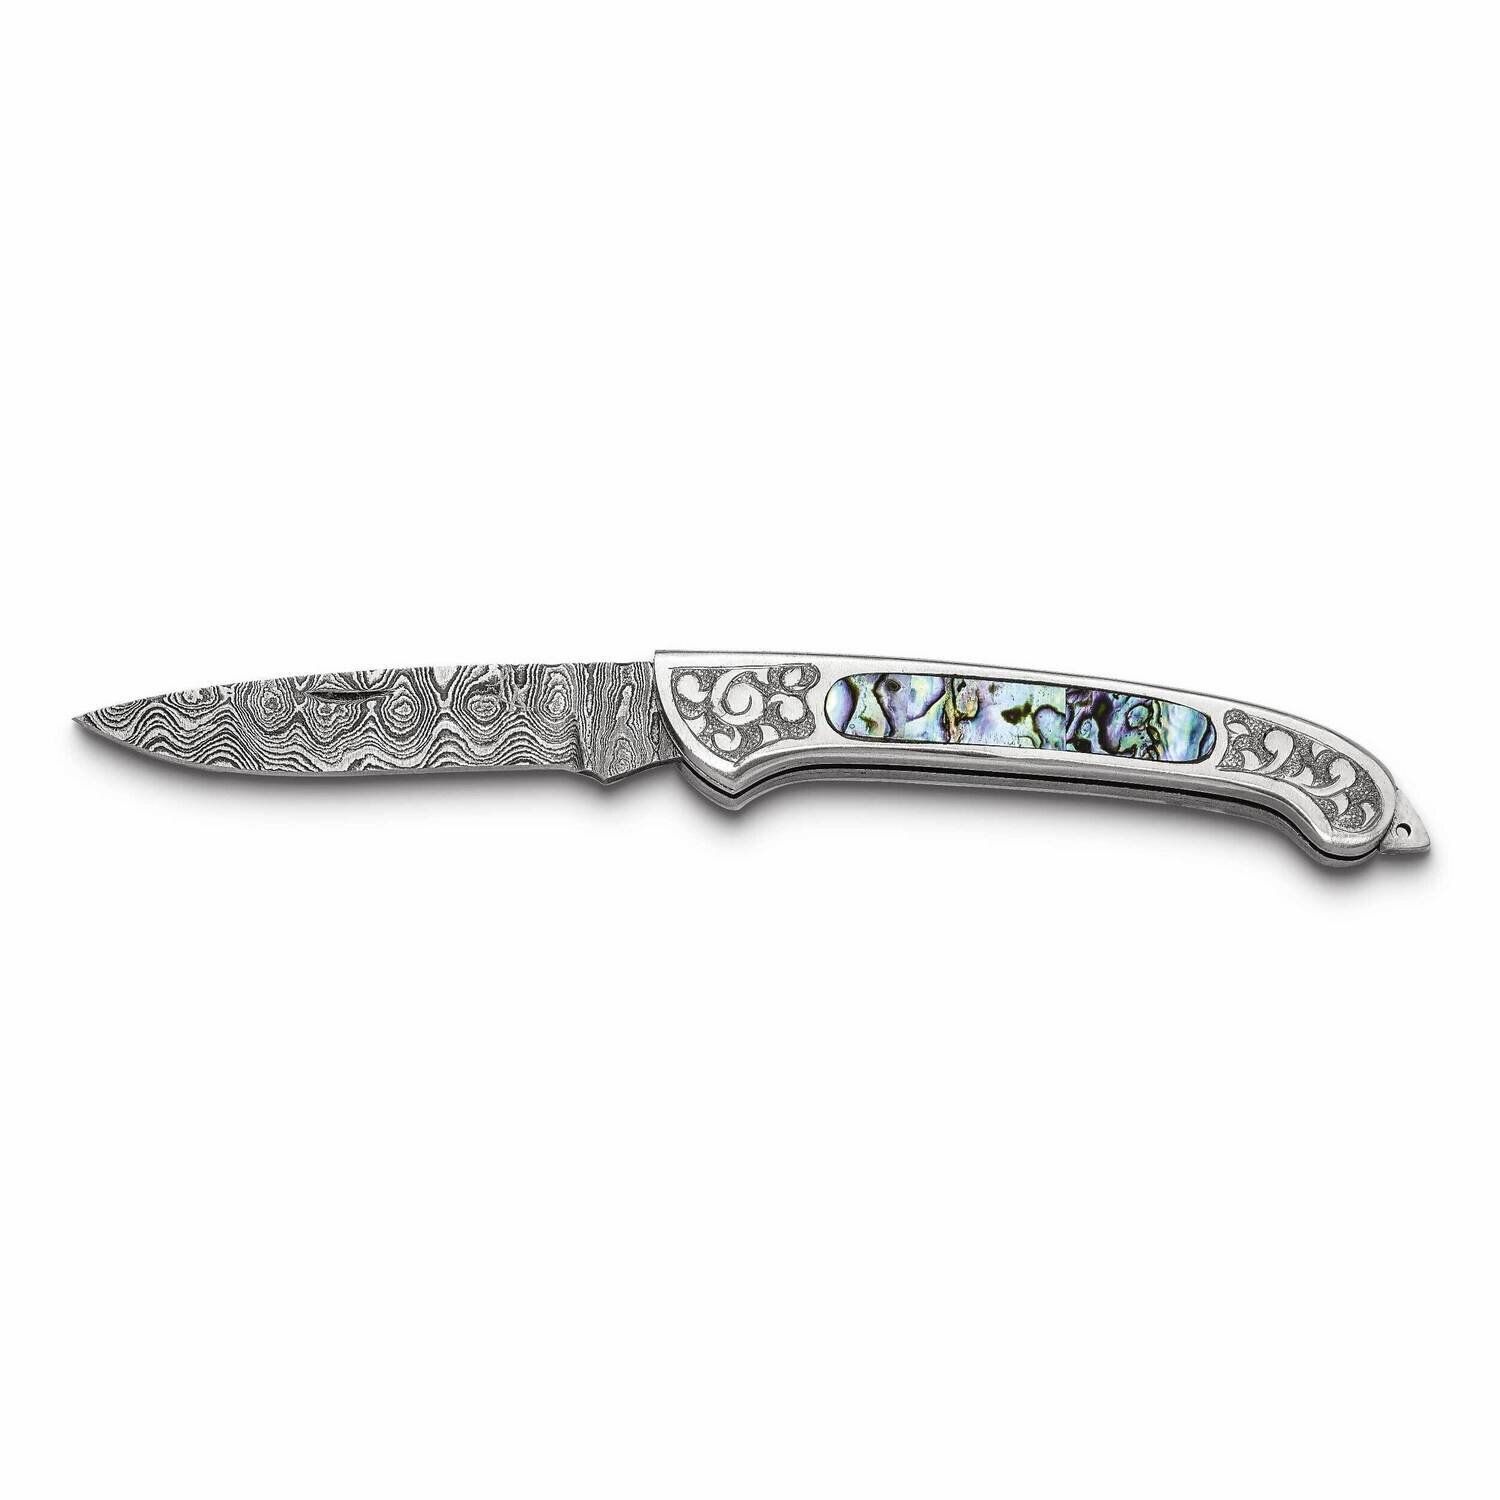 By Jere Folding Blade Abalone Inlay Handle Knife with Leather Sheath and Wooden Gift Box Damascus Steel 256 Layer KN3261